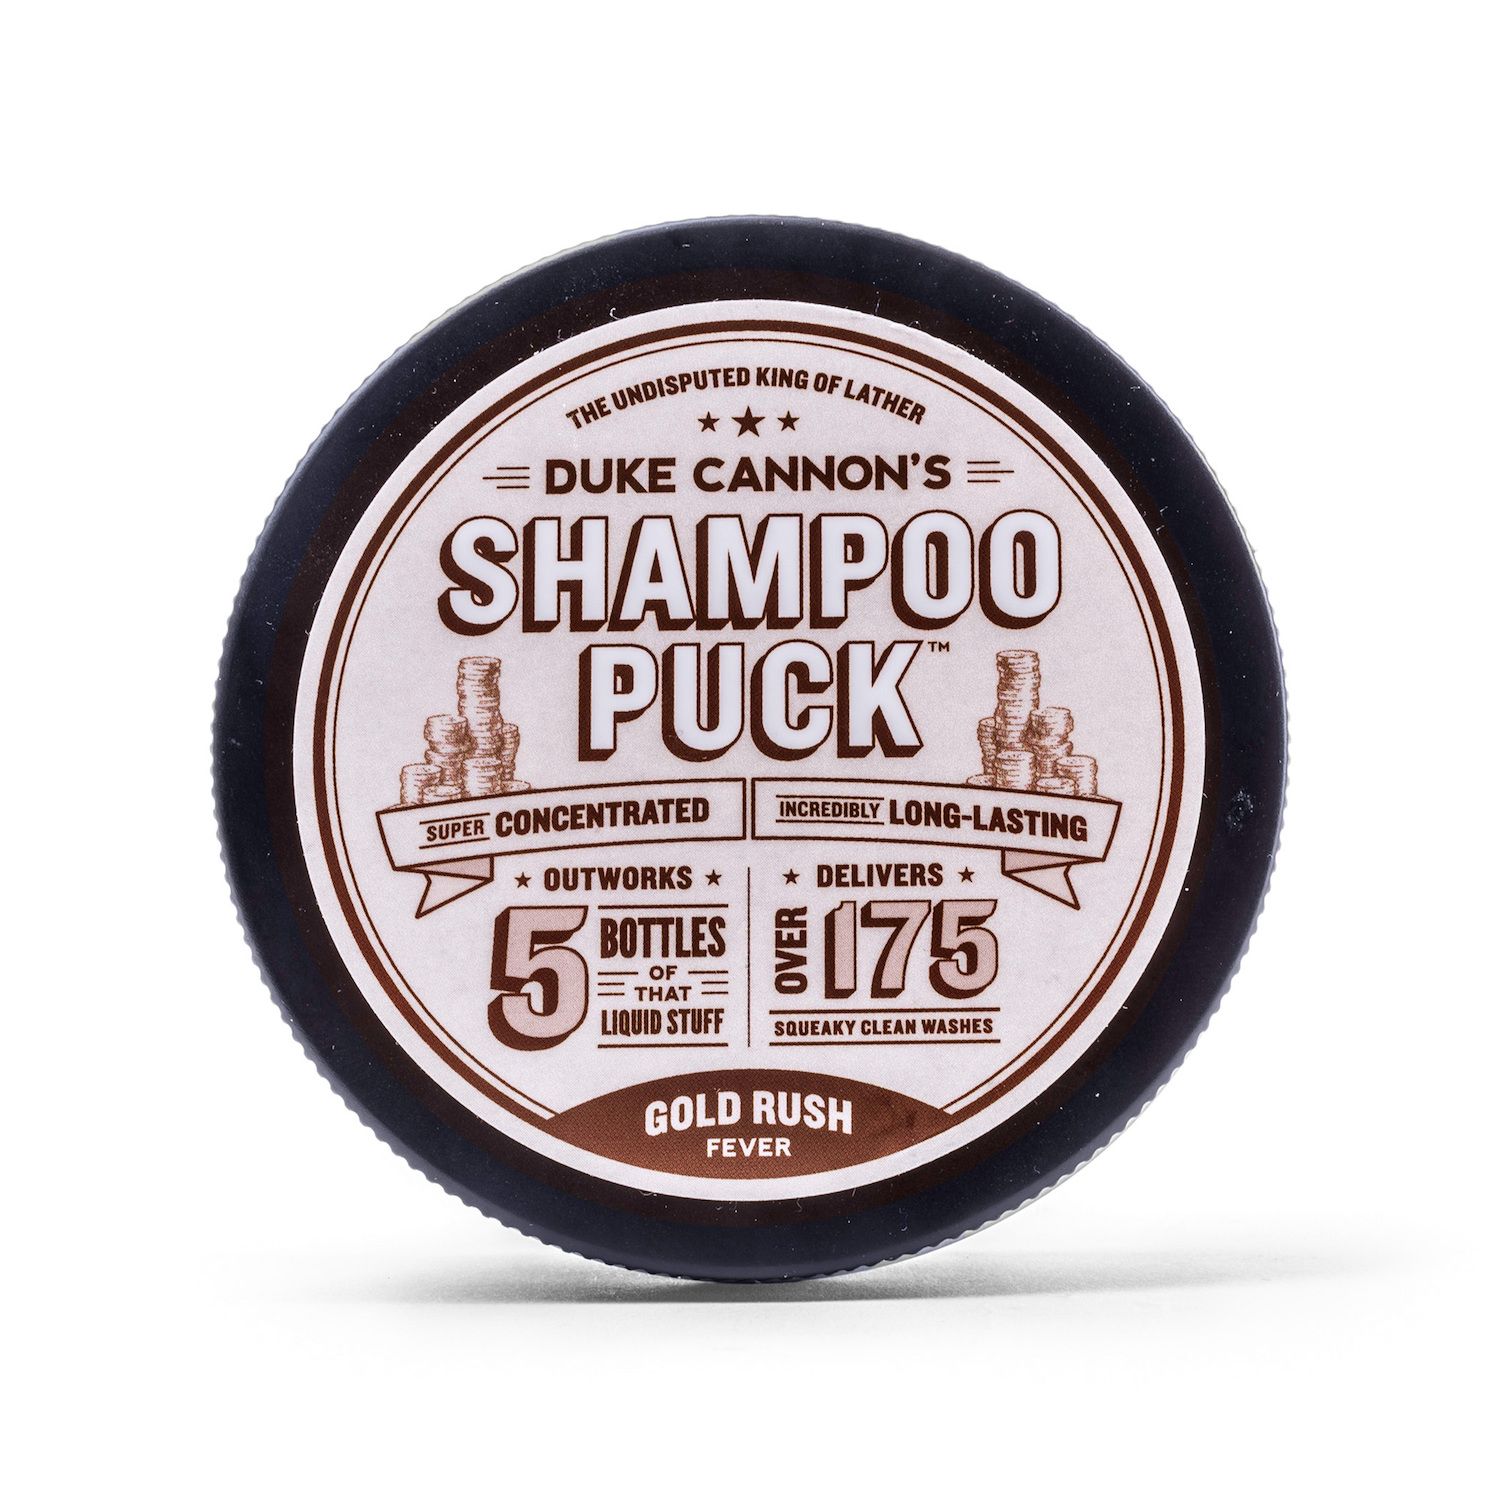 Image for Duke Cannon Supply Co. Shampoo Puck - Gold Rush Fever at Kohl's.